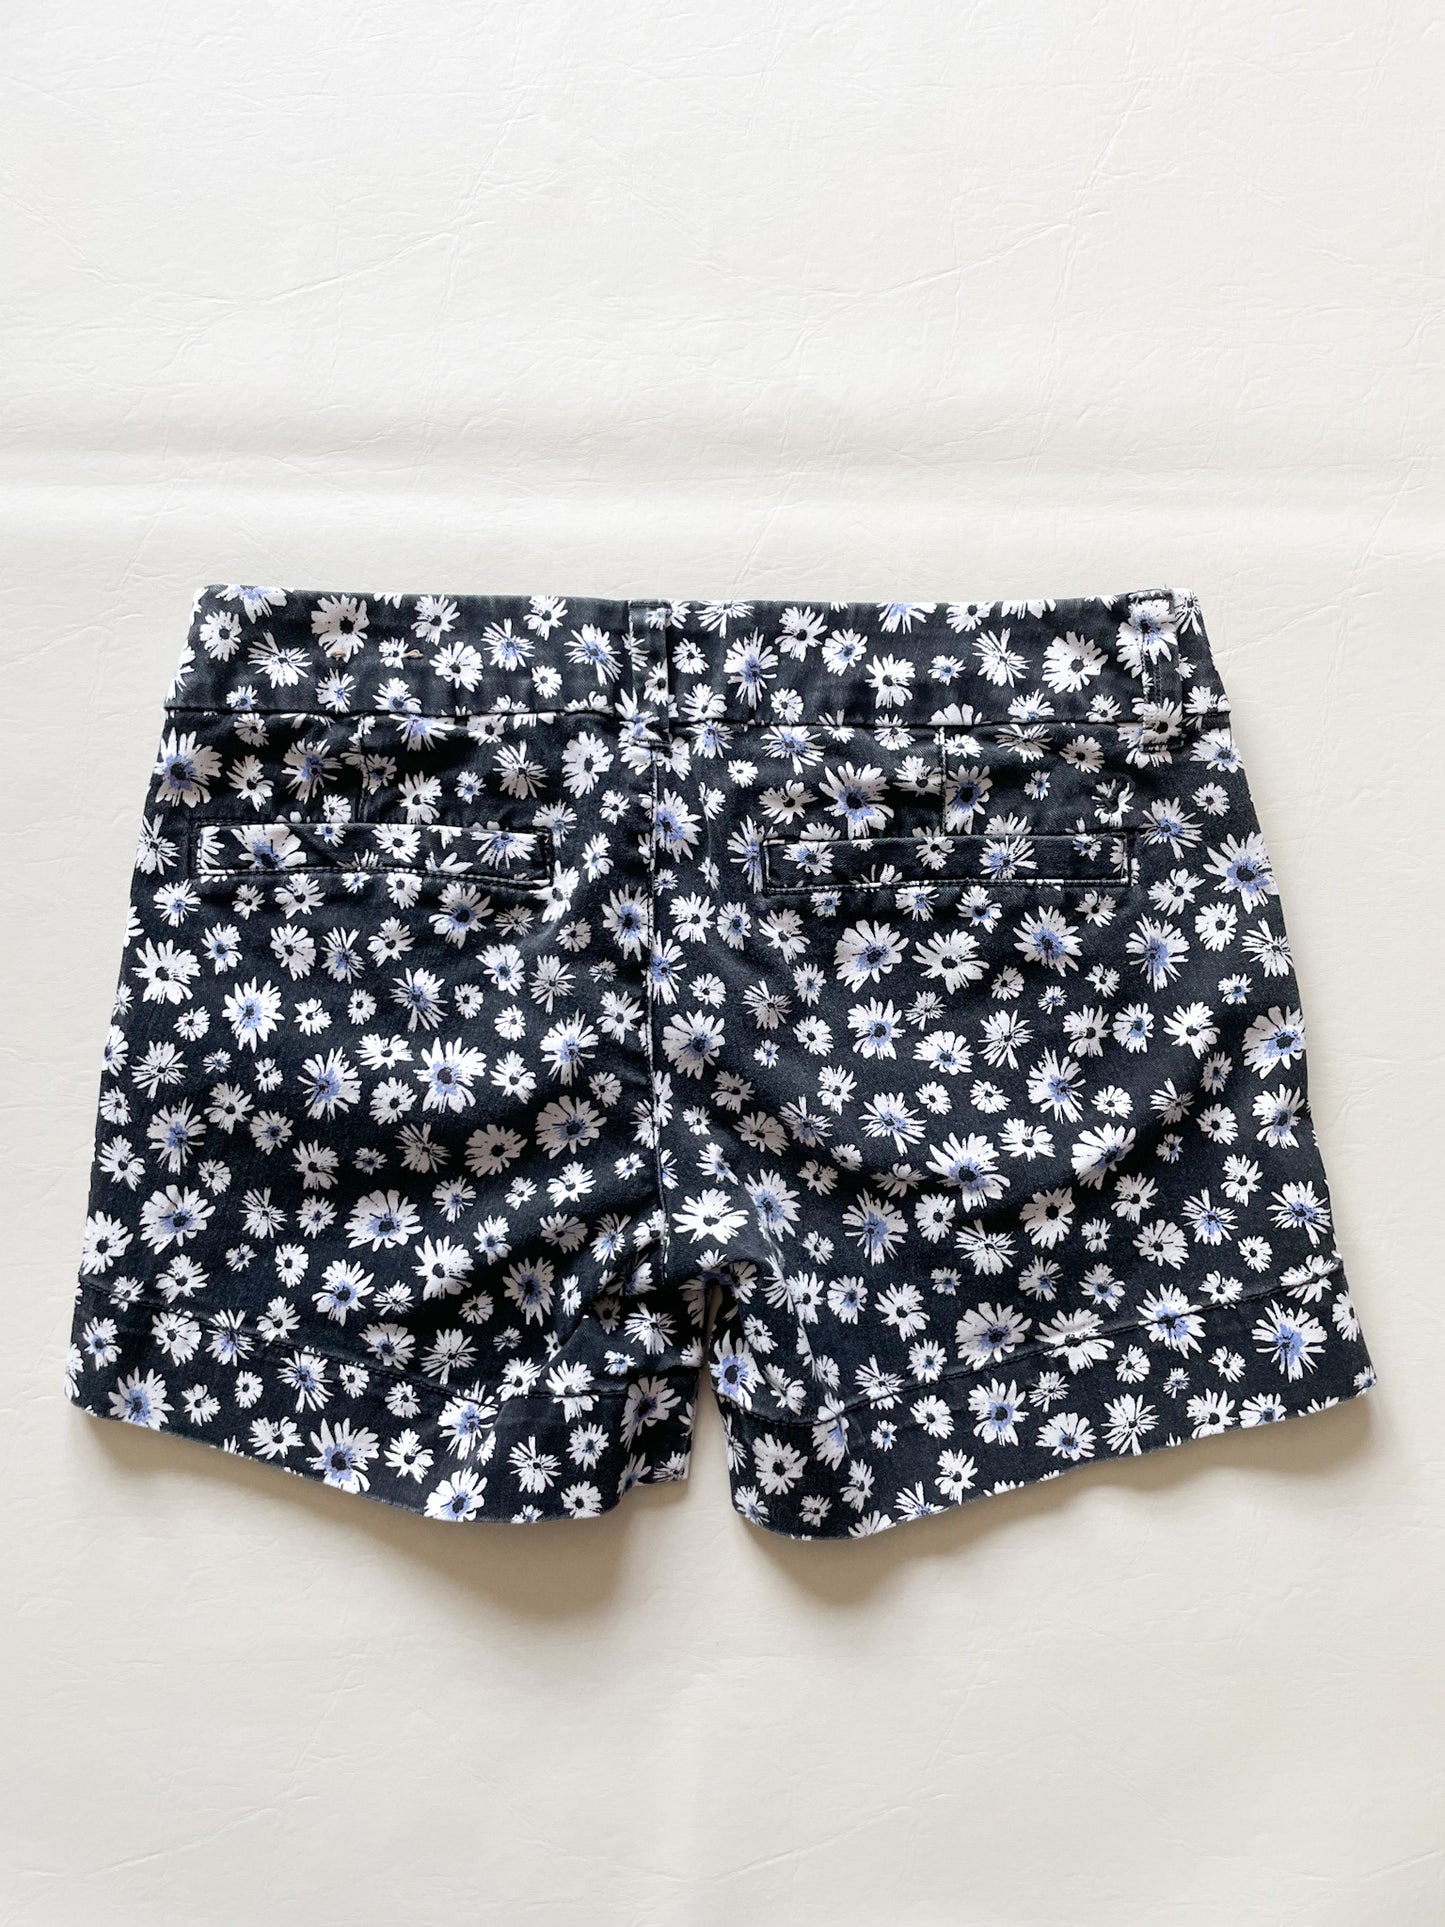 American Eagle Outfitters Black Navy Flower Print Chino Shorts - Size 00